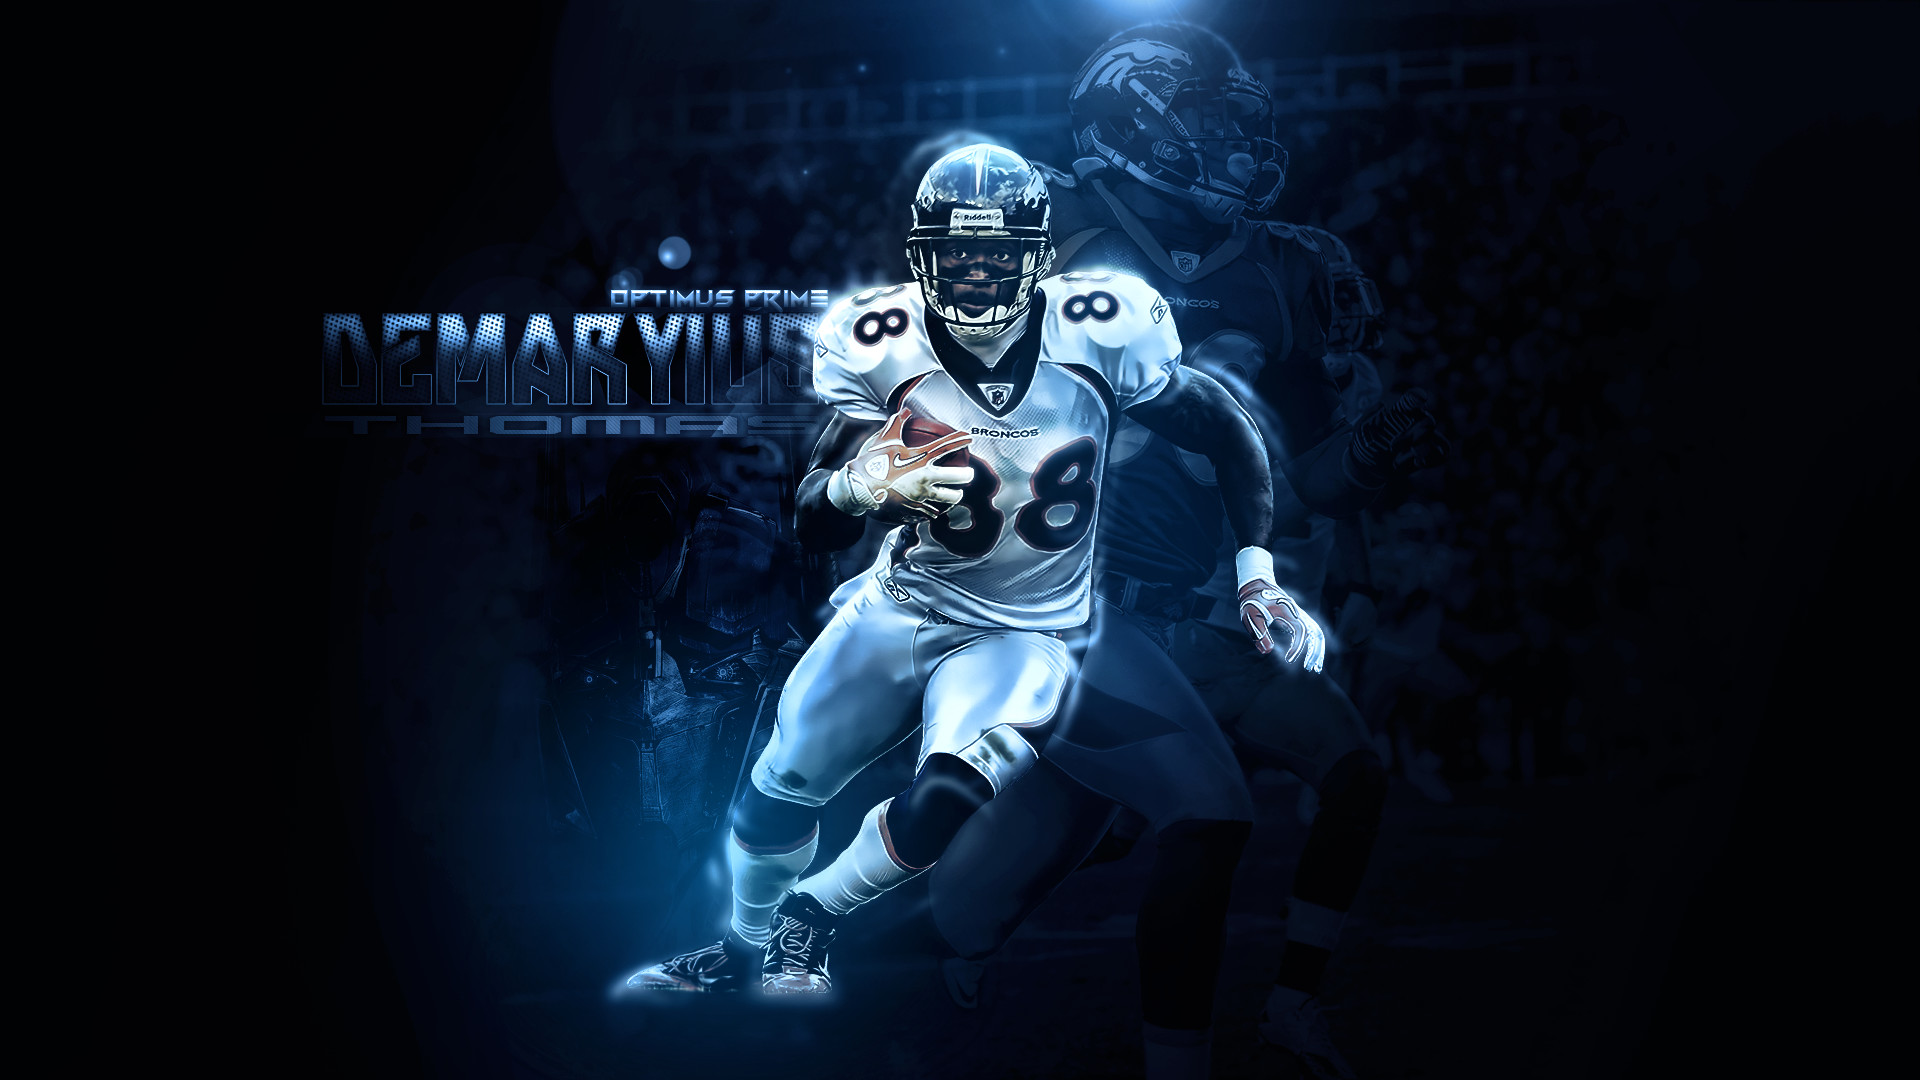 1920x1080 42 best DEMARYIUS THOMAS images on Pinterest | Broncos fans .